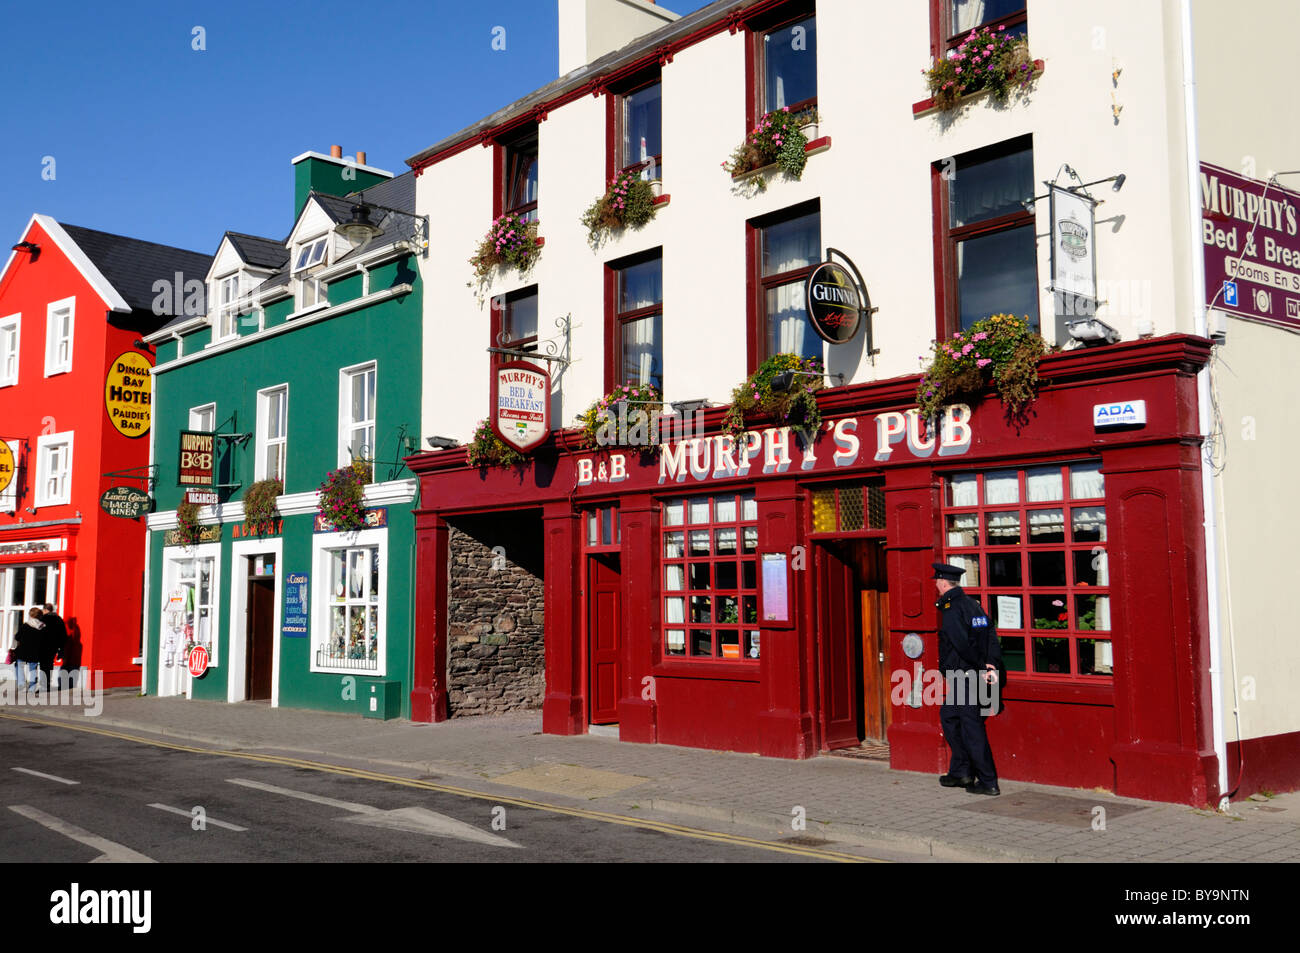 Public house bar pub licensed premises rural ireland dingle peninsula ring of kerry front frontage facade outside policeman Stock Photo